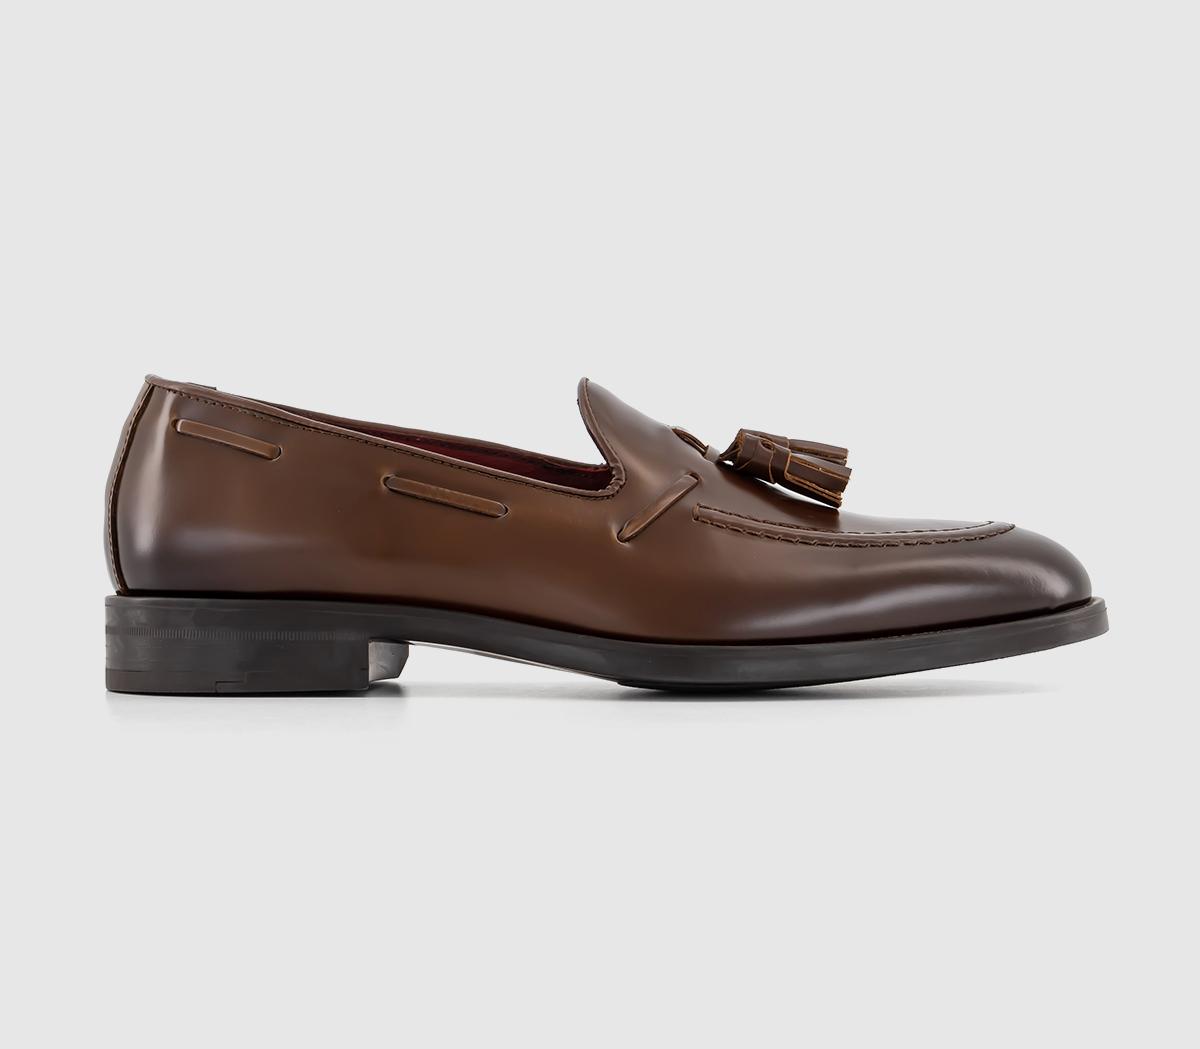 Poste Painswick Tassel Loafers Tan Leather - Men’s Loafers